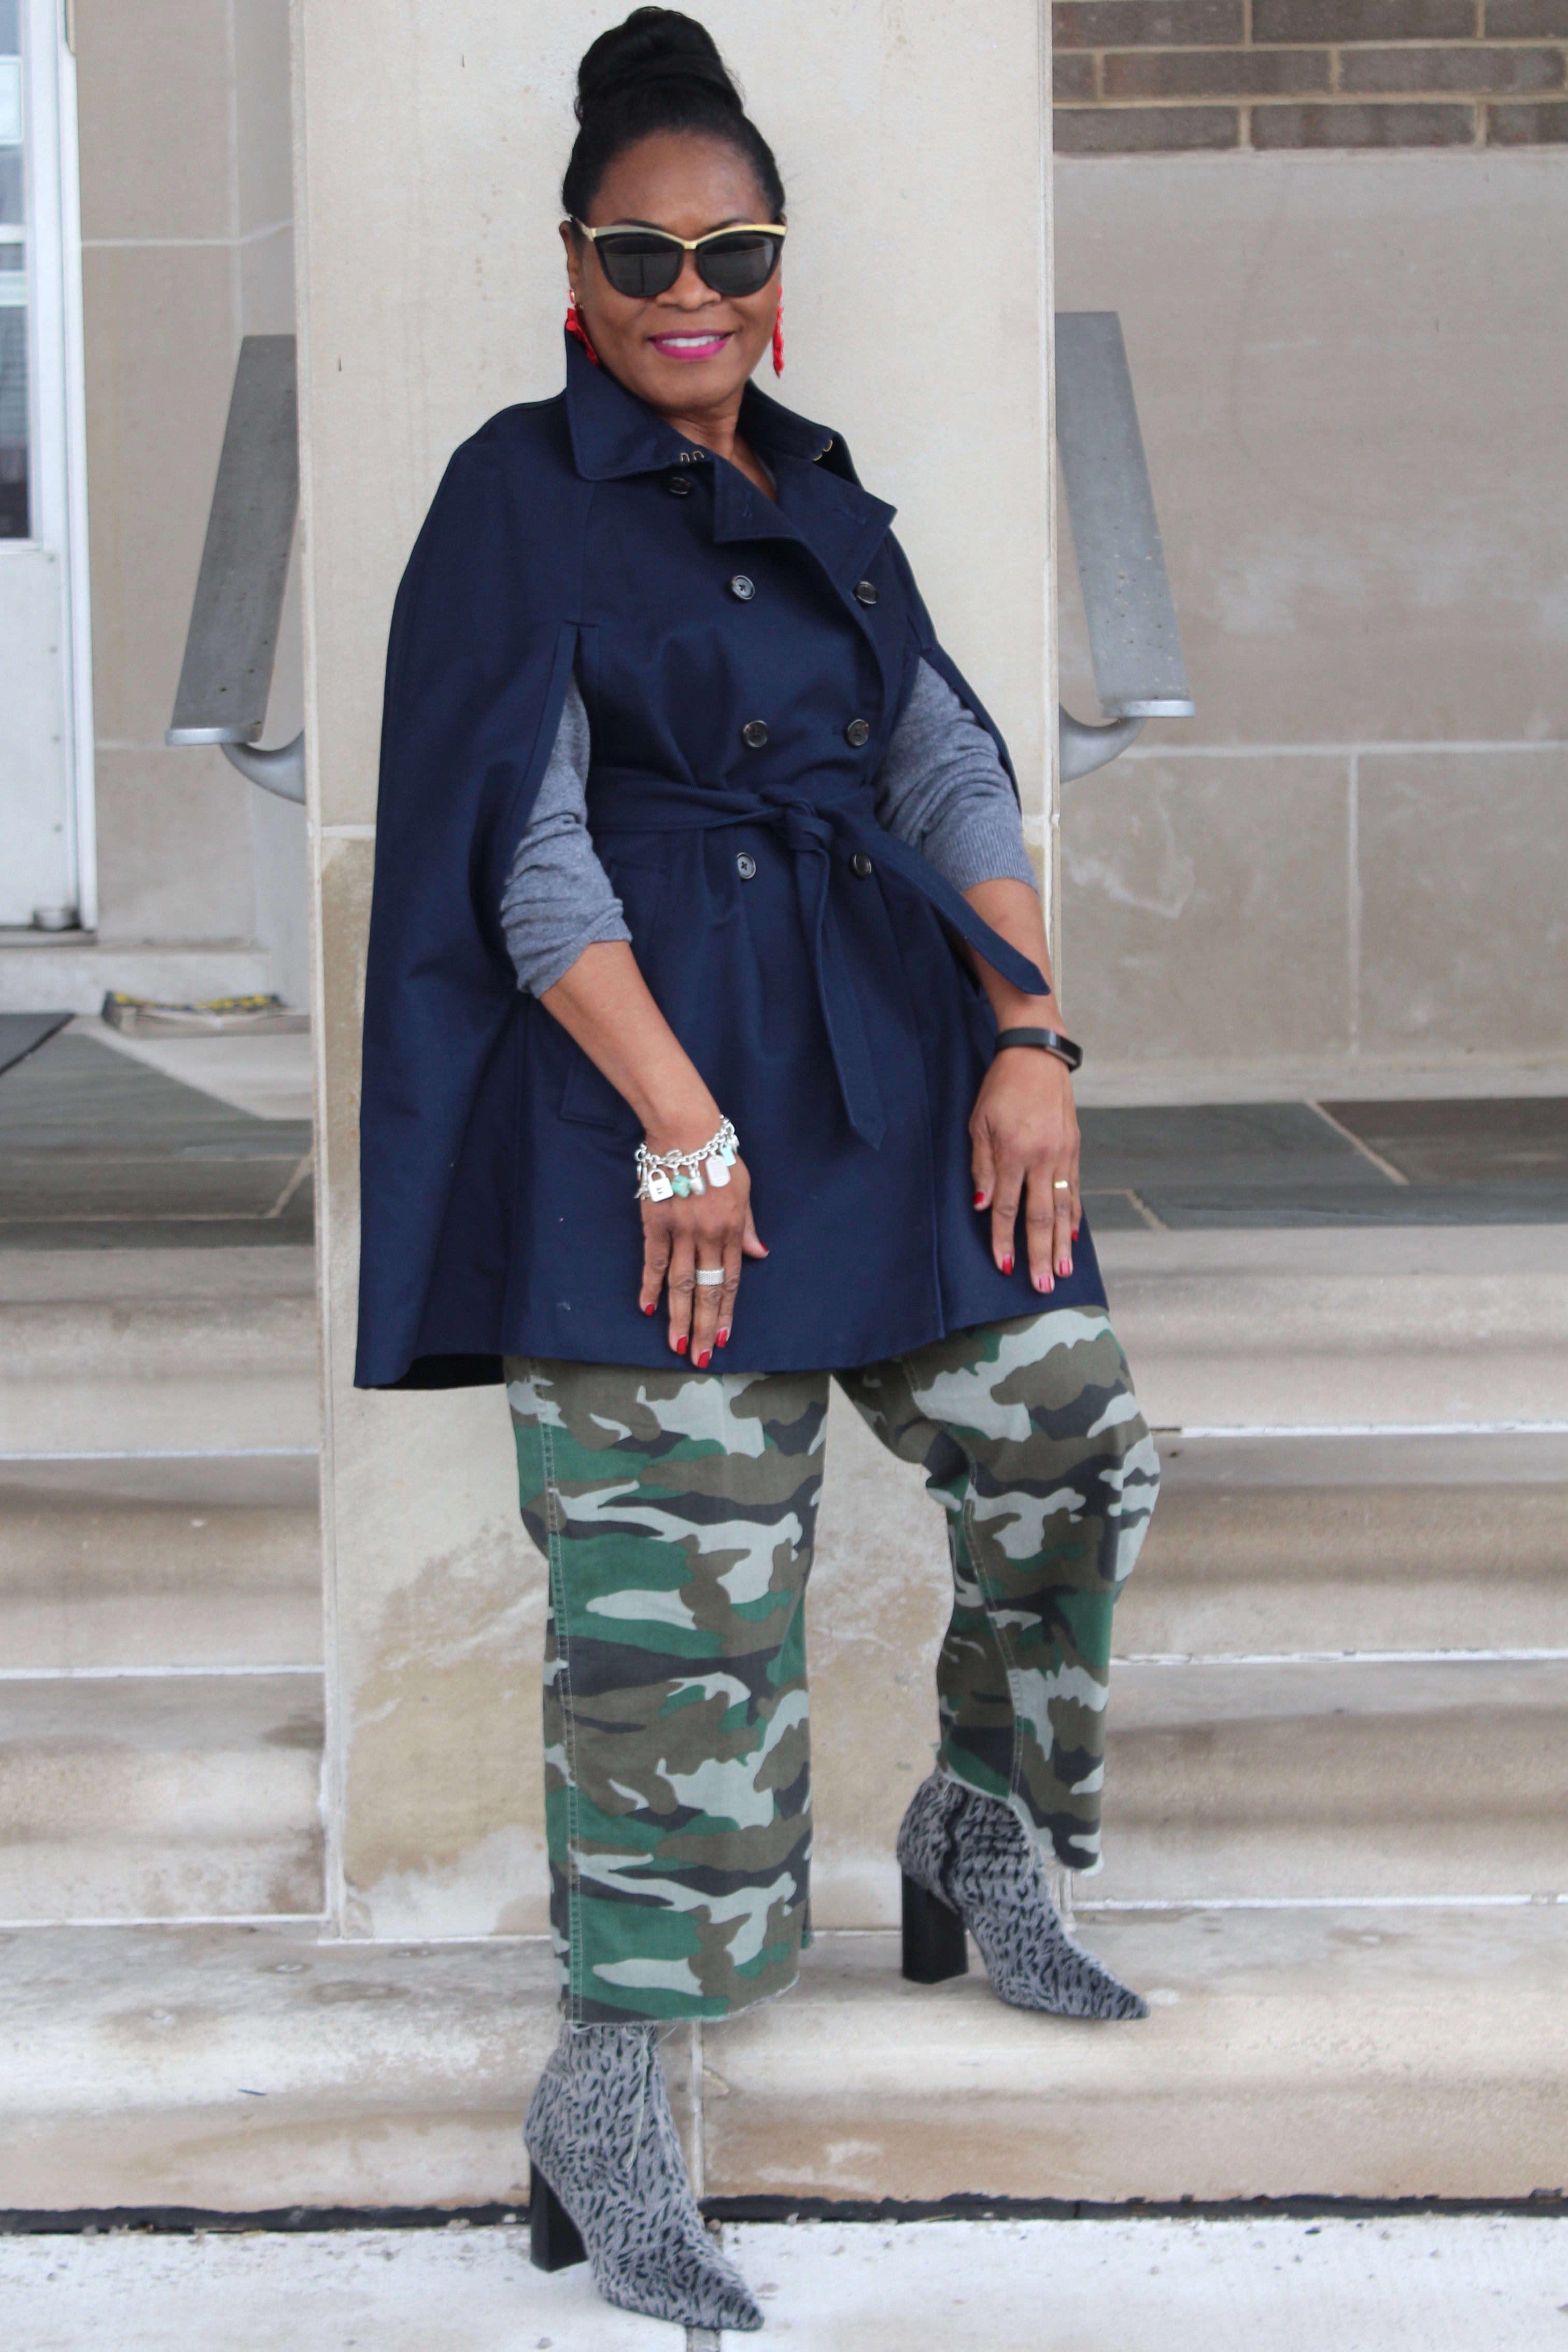 Difference Between Cold and Flu; J.Crew Trench Cape; J.Crew Camouflage Foundry Pants; Jeffrey Campbell Siren Bootie